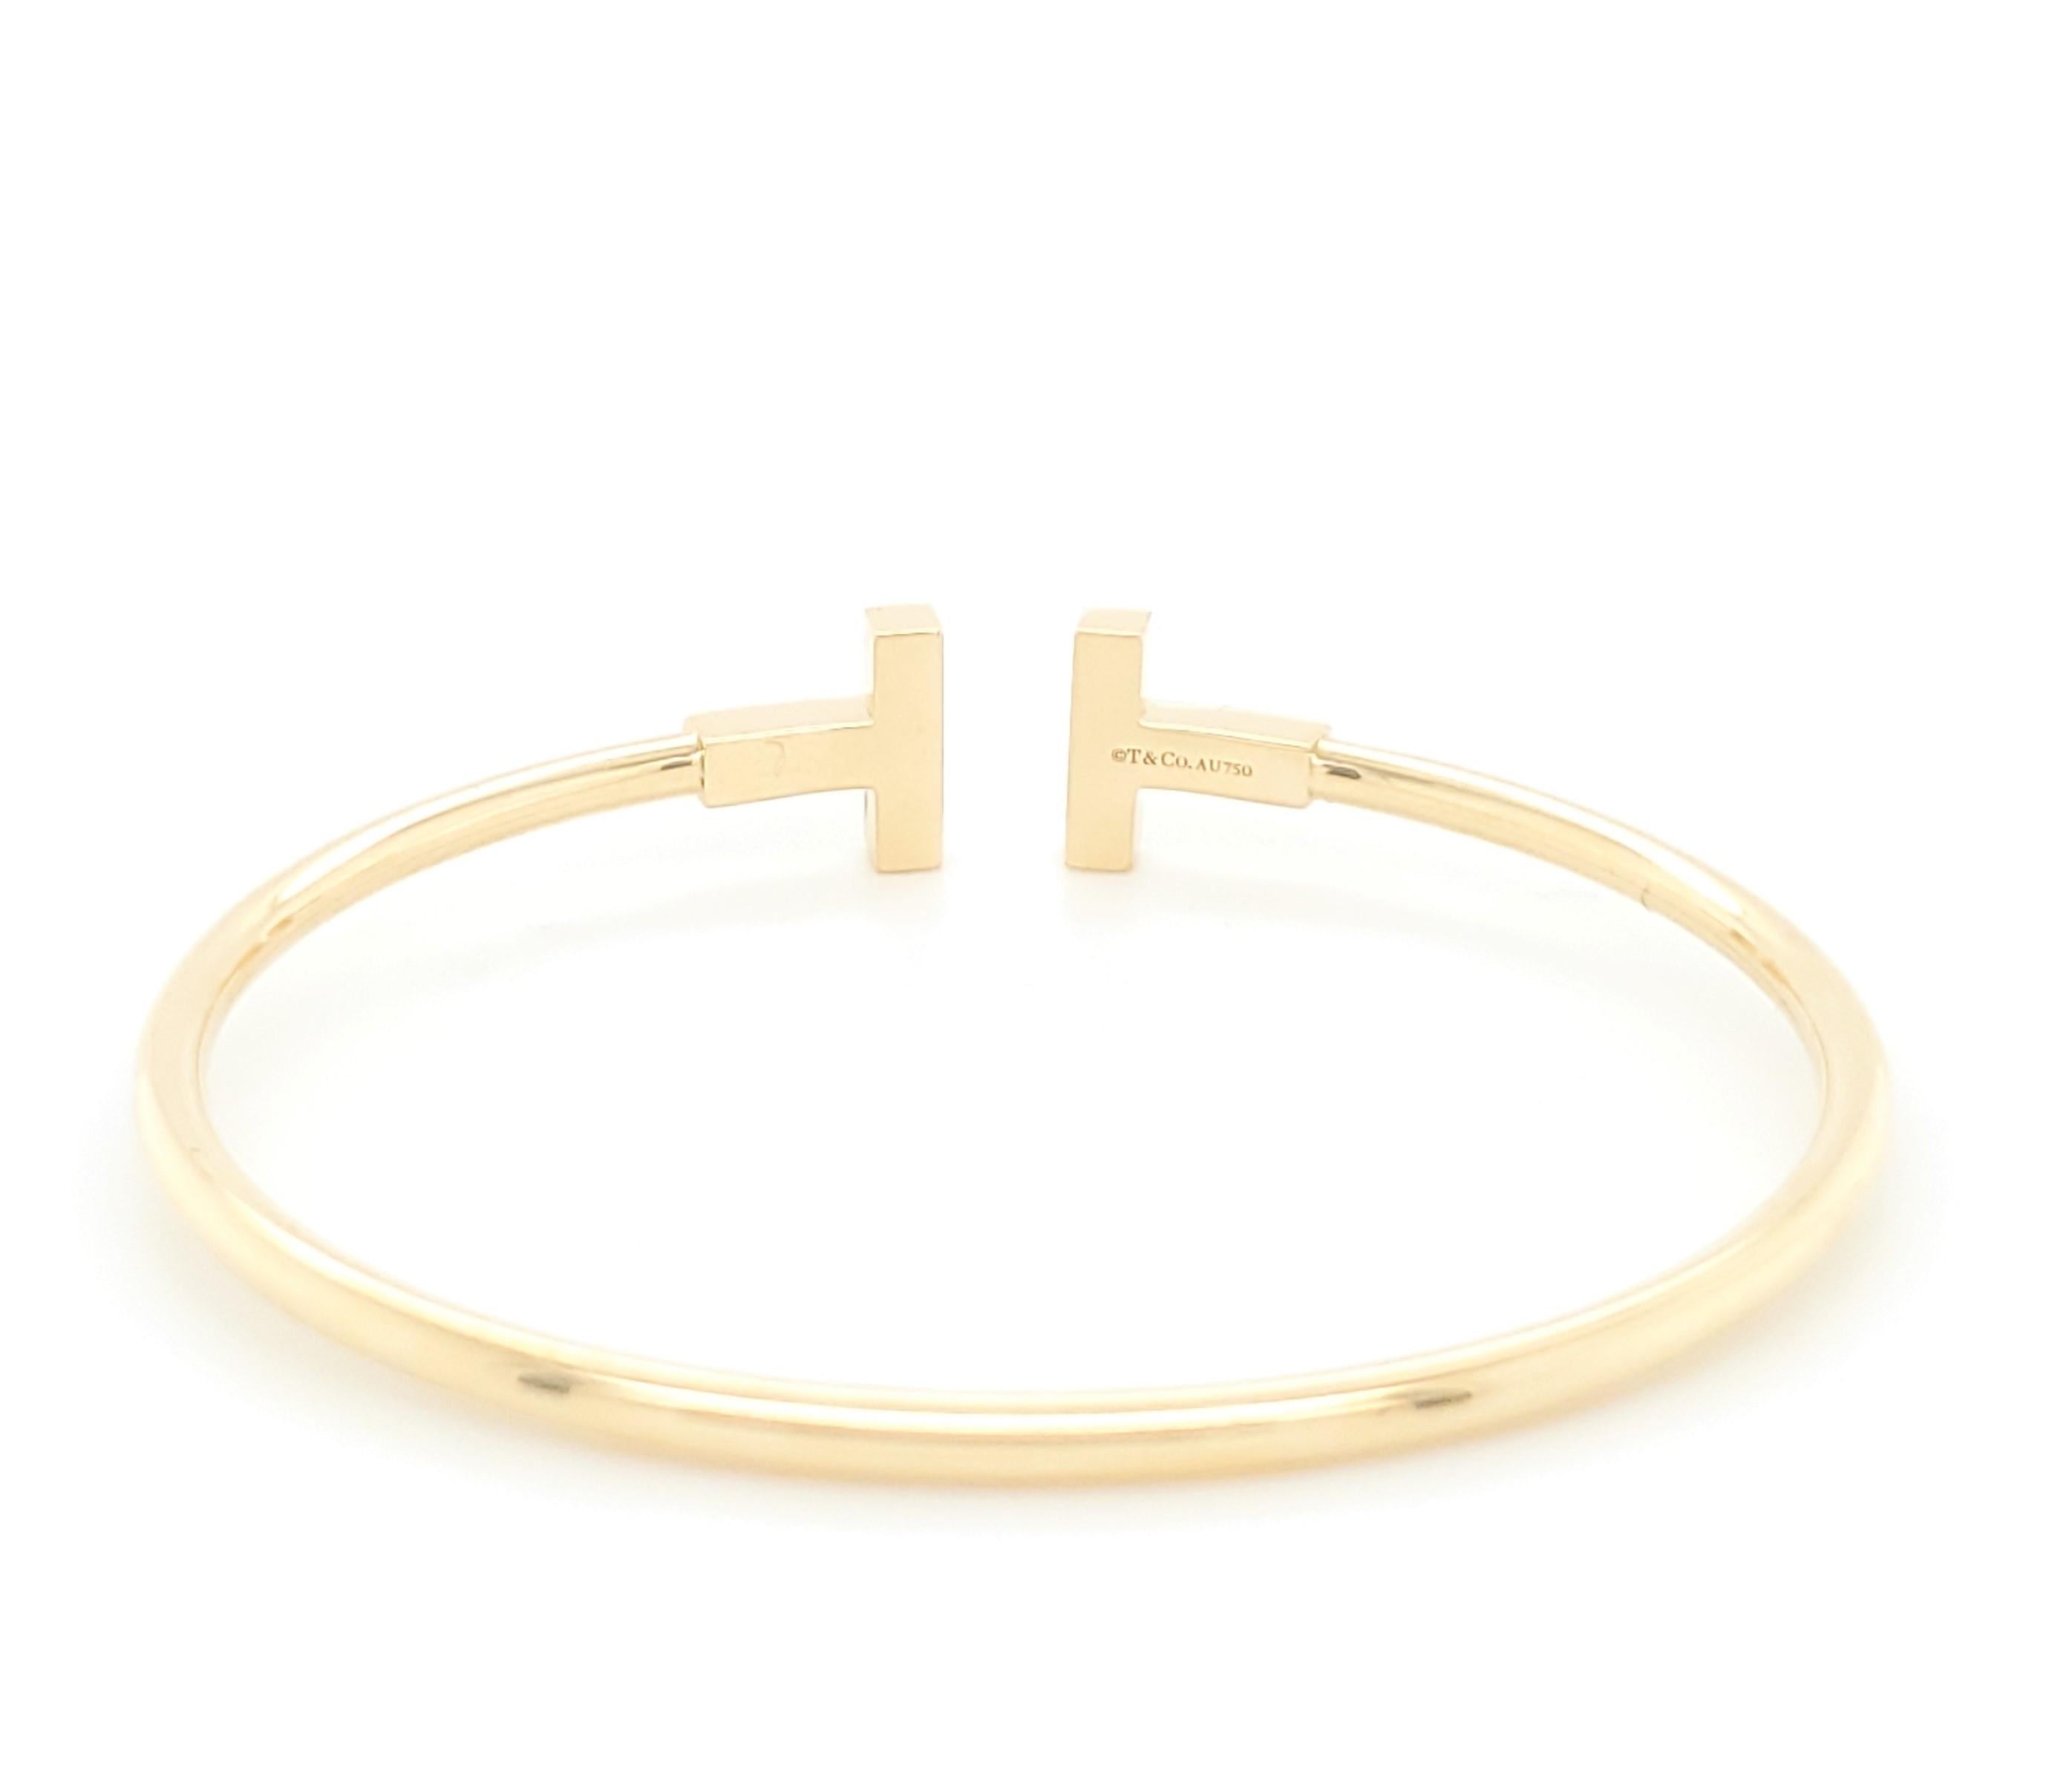 Authentic Tiffany & Co. T Square Wire bracelet made in 18 karat yellow gold with approximately 18 diamonds weighing an estimated .36 carats. Can fit up to a size 5 1/2 wrist.  Inspired by the strong, clean lines of the letter T, this bracelet is